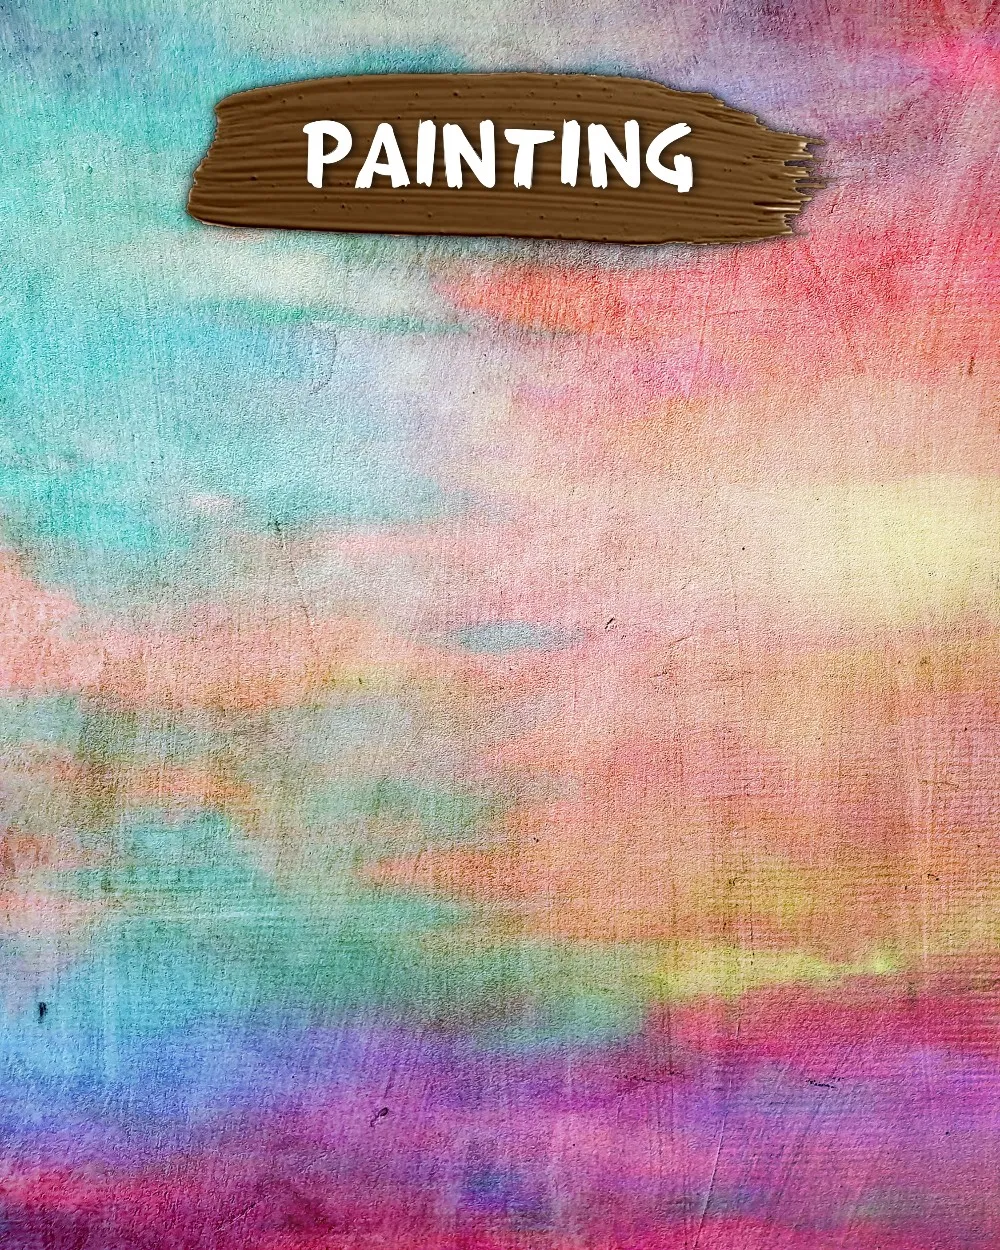 You are currently viewing Painting wall background for photo editing download in high quality #FREE